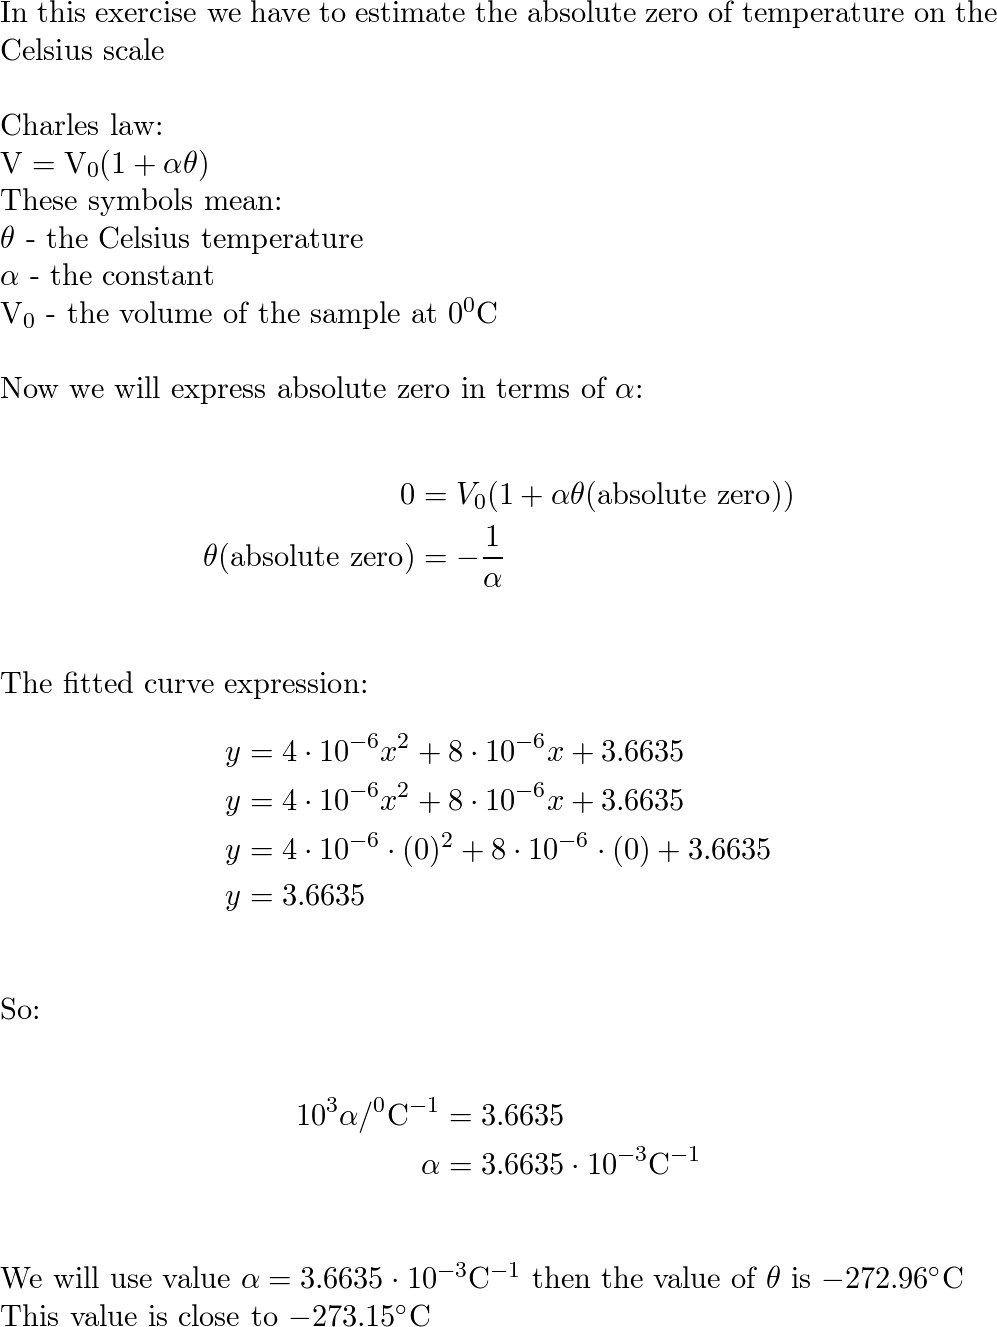 Show that the van der Waals equation leads to values of Z <